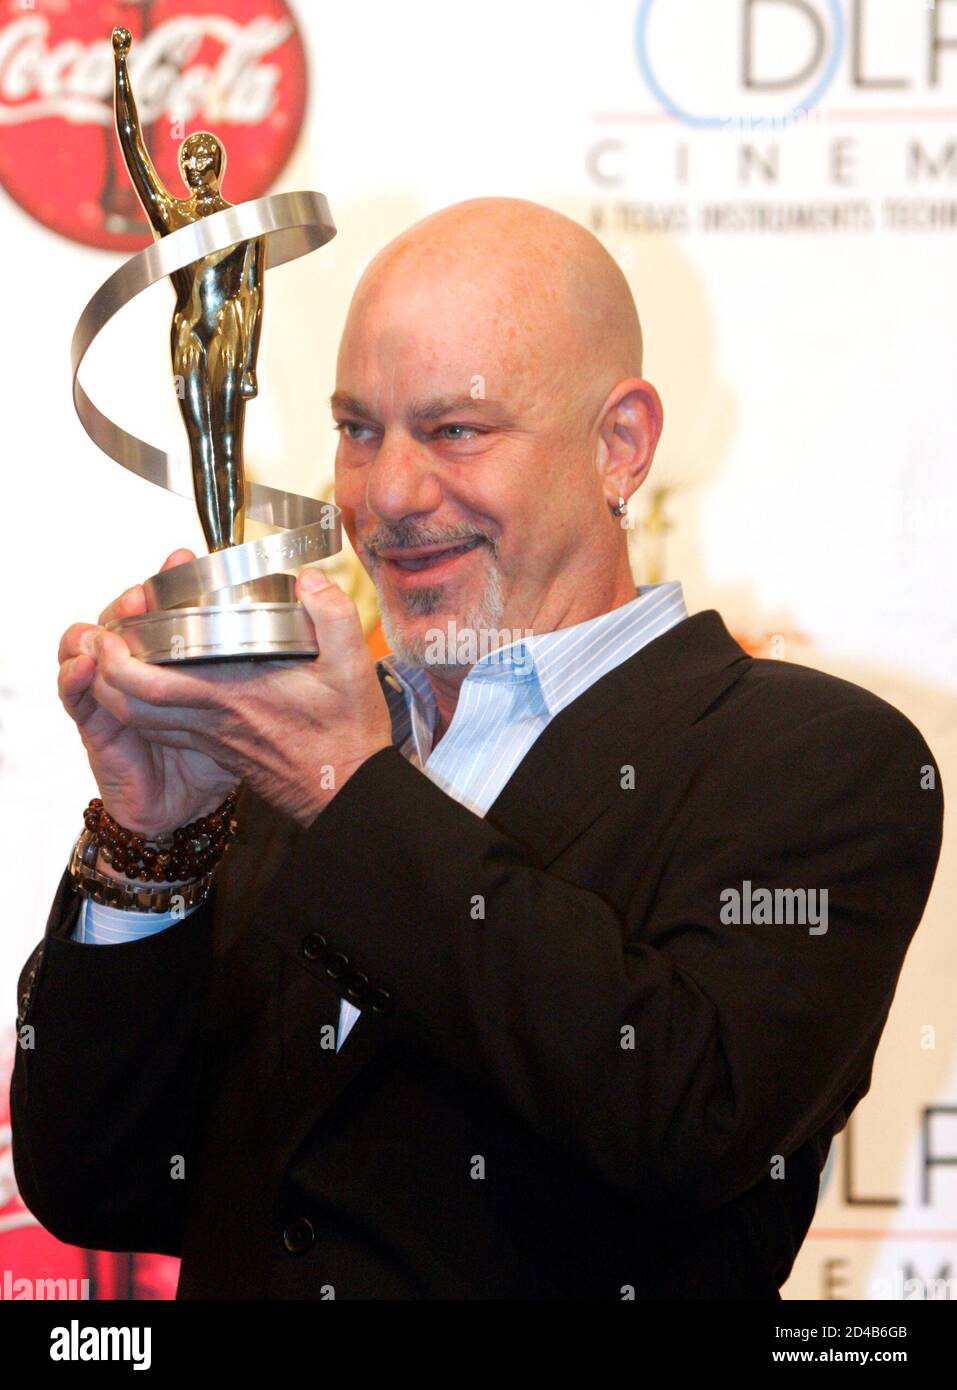 Director Rob Cohen holds the Director of the Year award at the Paris Las Vegas hotel during ShoWest, the official convention of the National Association of Theatre Owners, March 17, 2005, in Las Vegas, Nevada. REUTERS/Ethan Miller  EM/MA Stock Photo